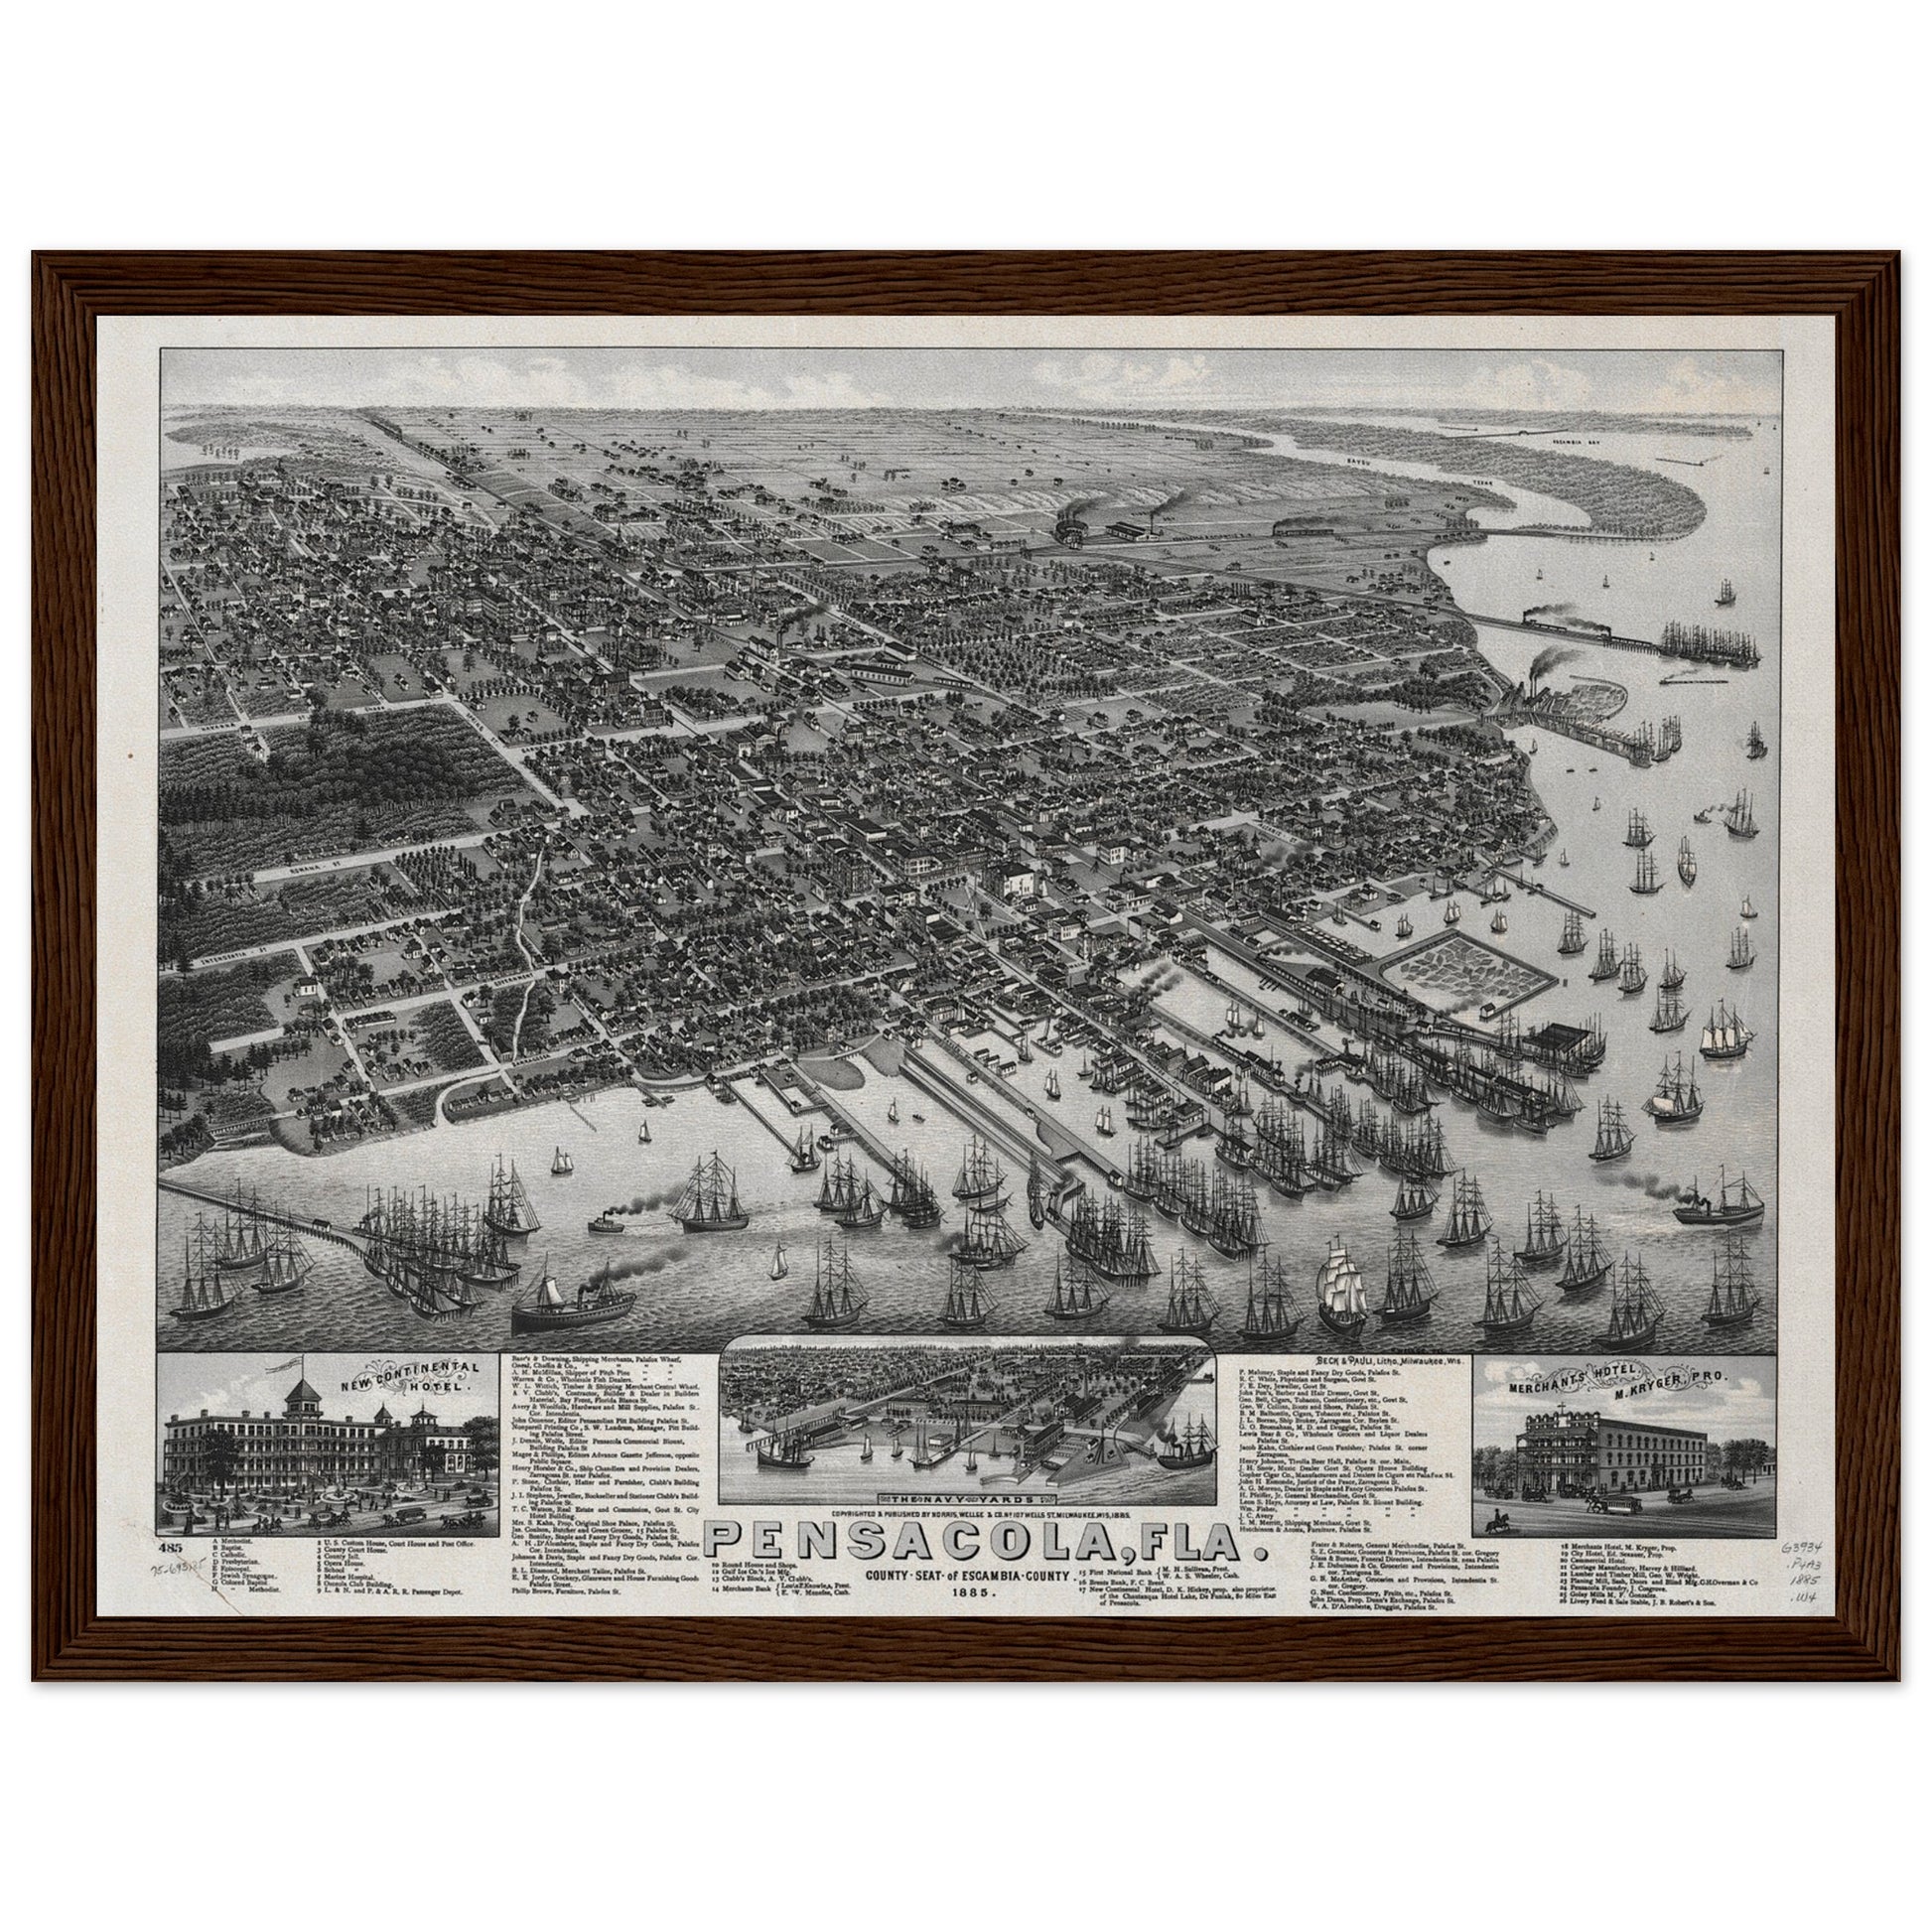 Aerial depiction of the city of Pensacola, Florida from 1885.